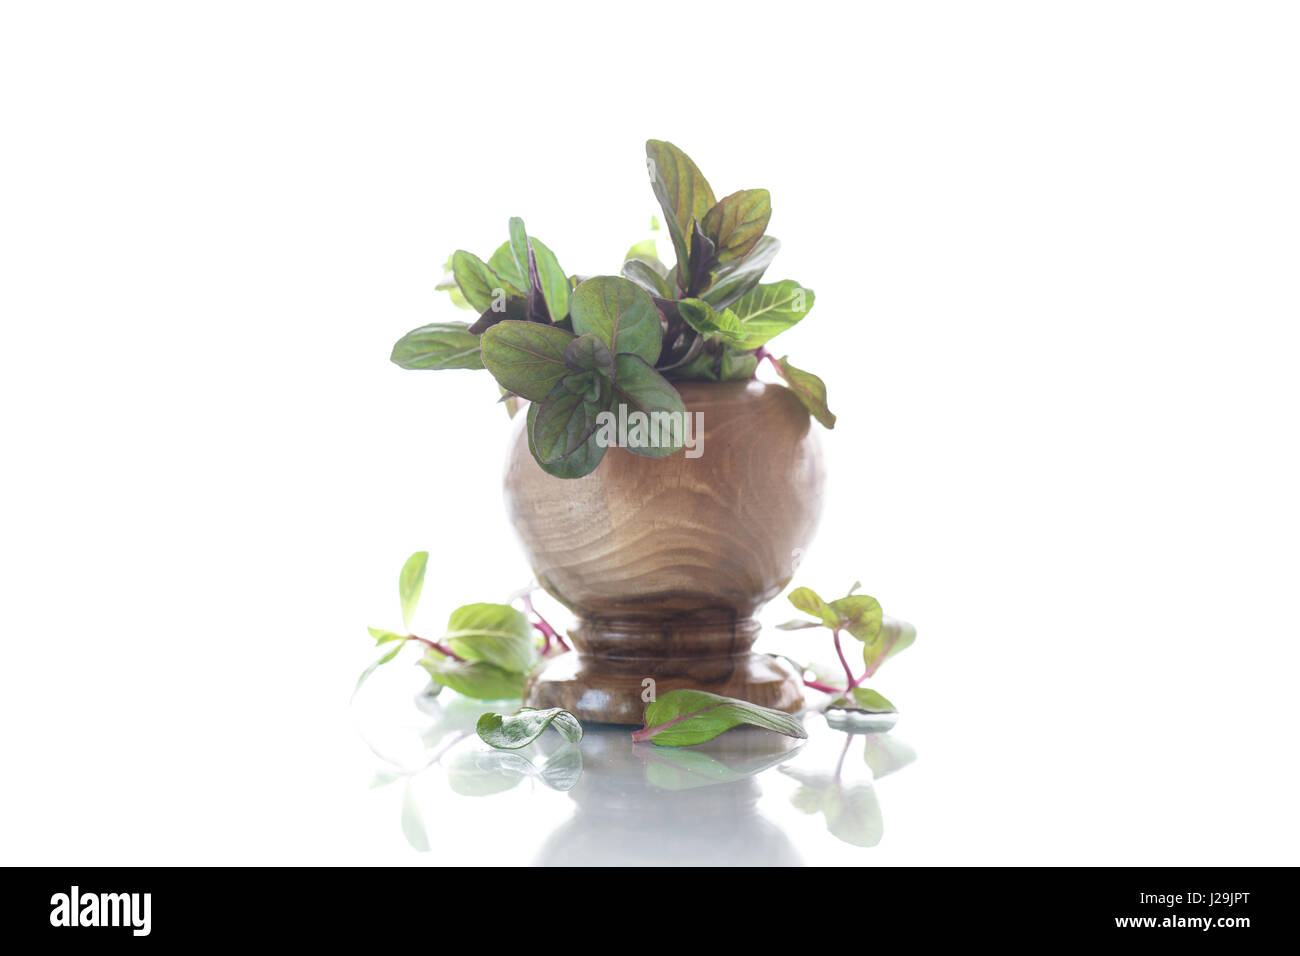 A bunch of fresh spring mint in a wooden vase Stock Photo